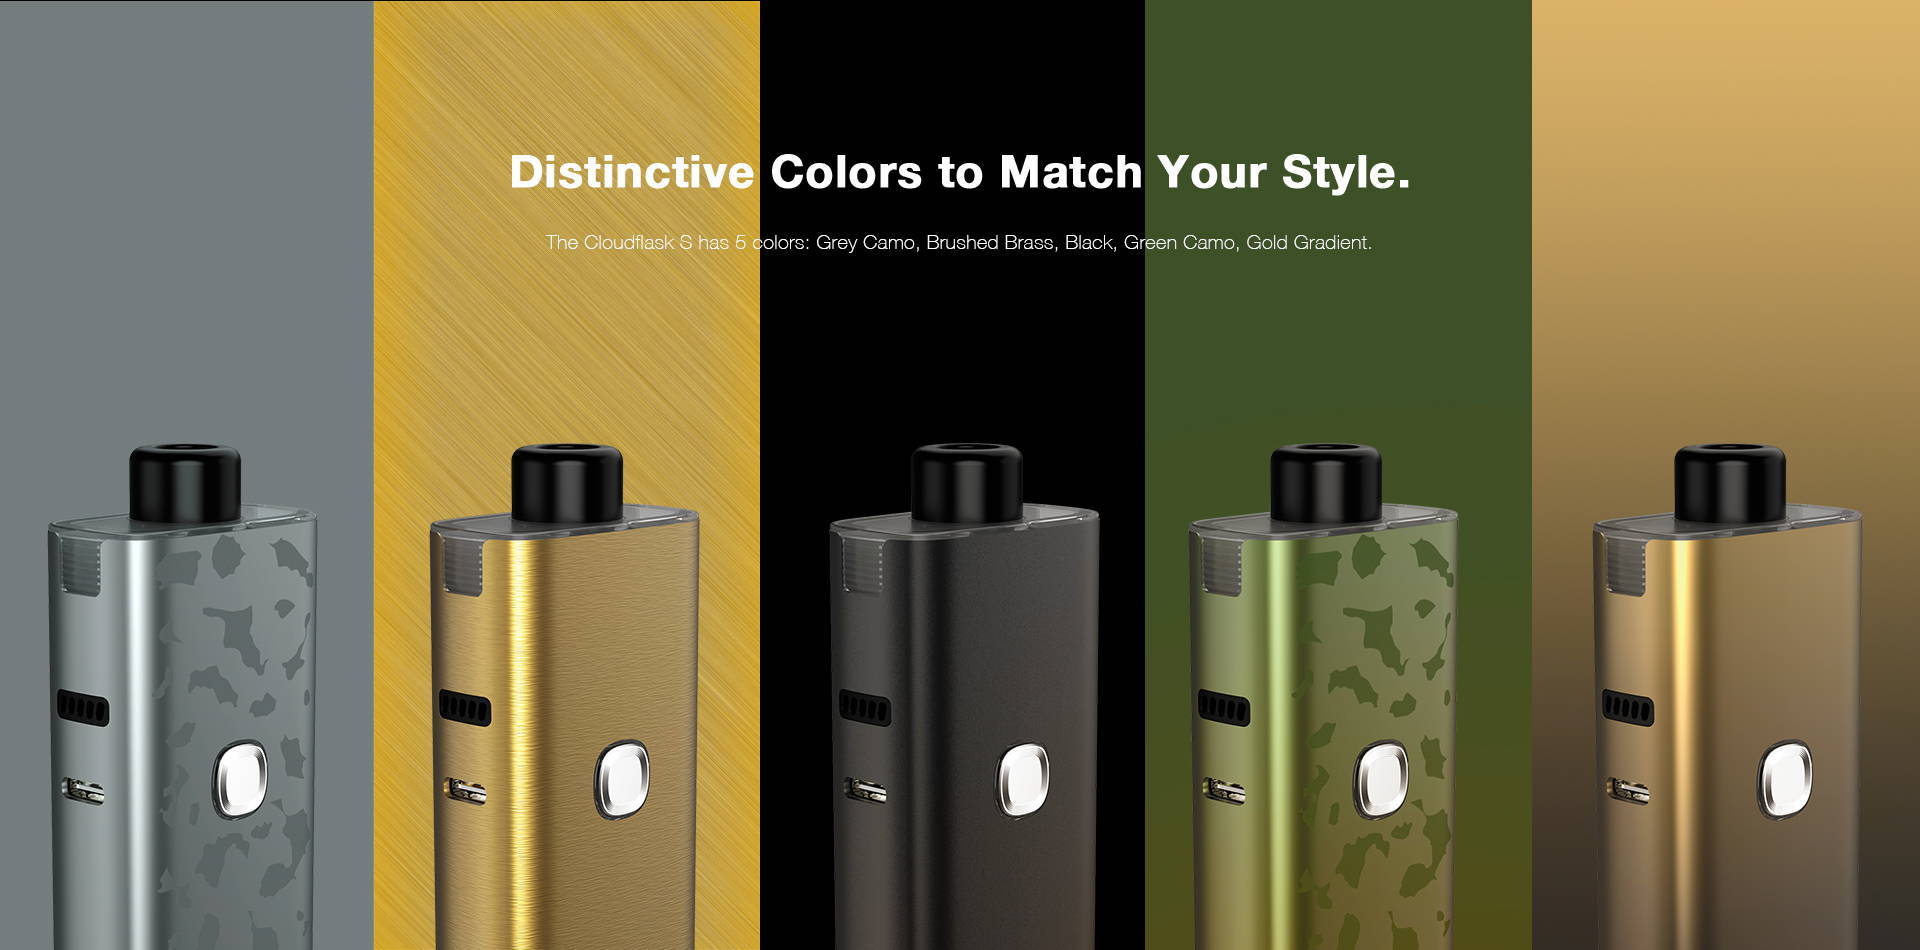 The Cloudflask S has 5 colors: Grey Camo, Brushed Brass, Black, Green Camo, Gold Gradient.